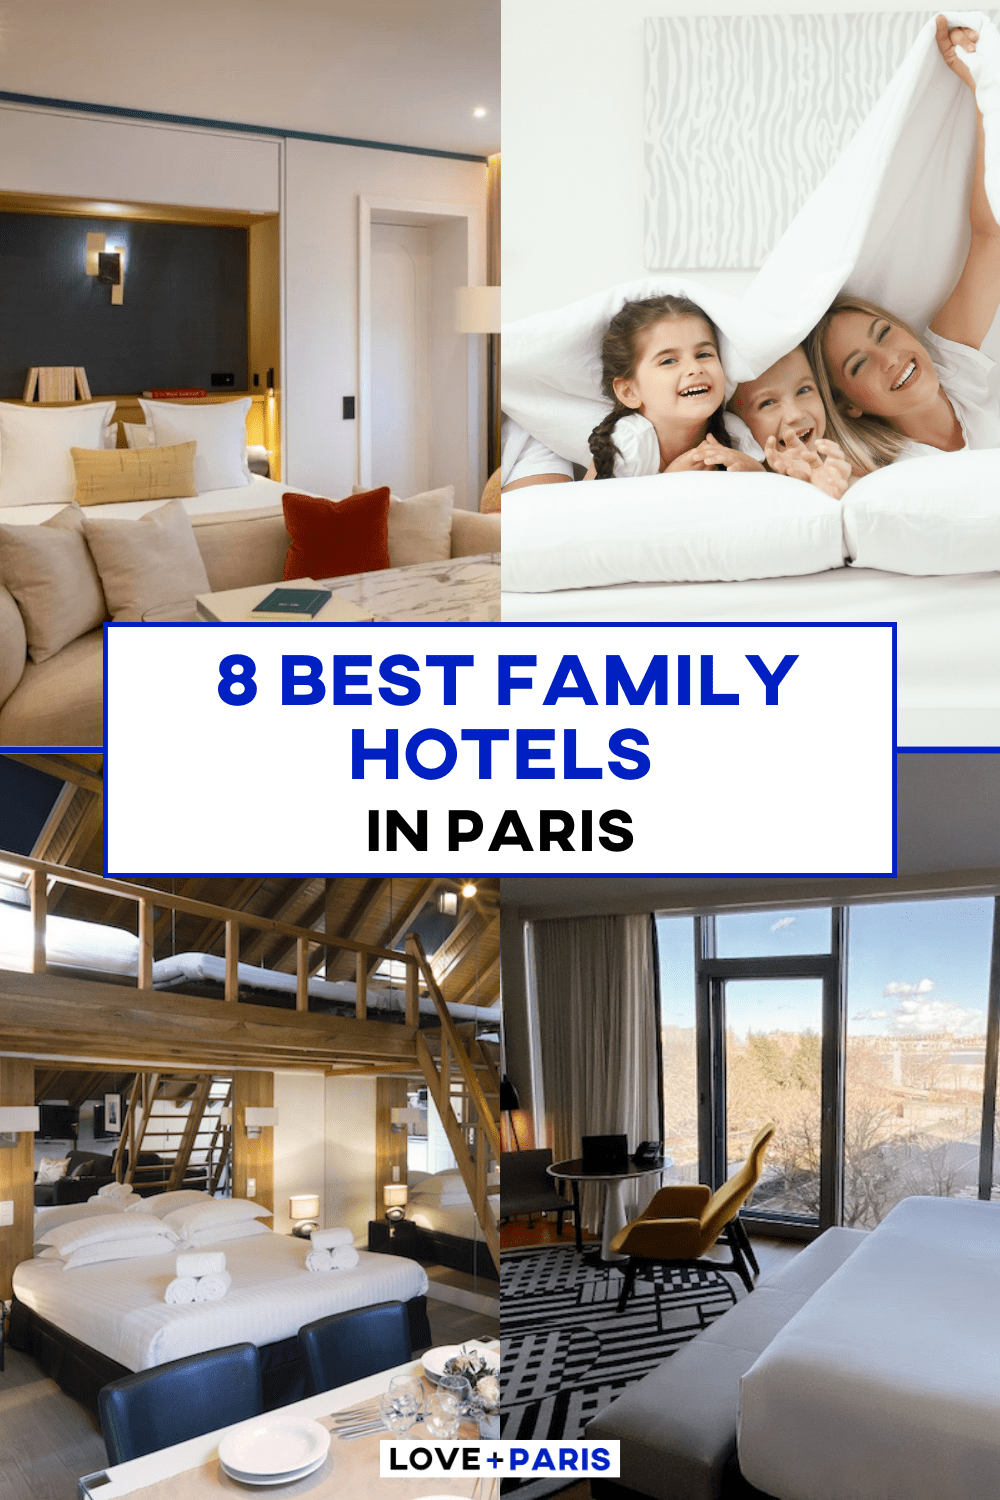 This is an image of a pinterest pin comprised of four images in a grid format. The images show different hotel scenes of family rooms and a happy family laughing together in a hotel bedroom.